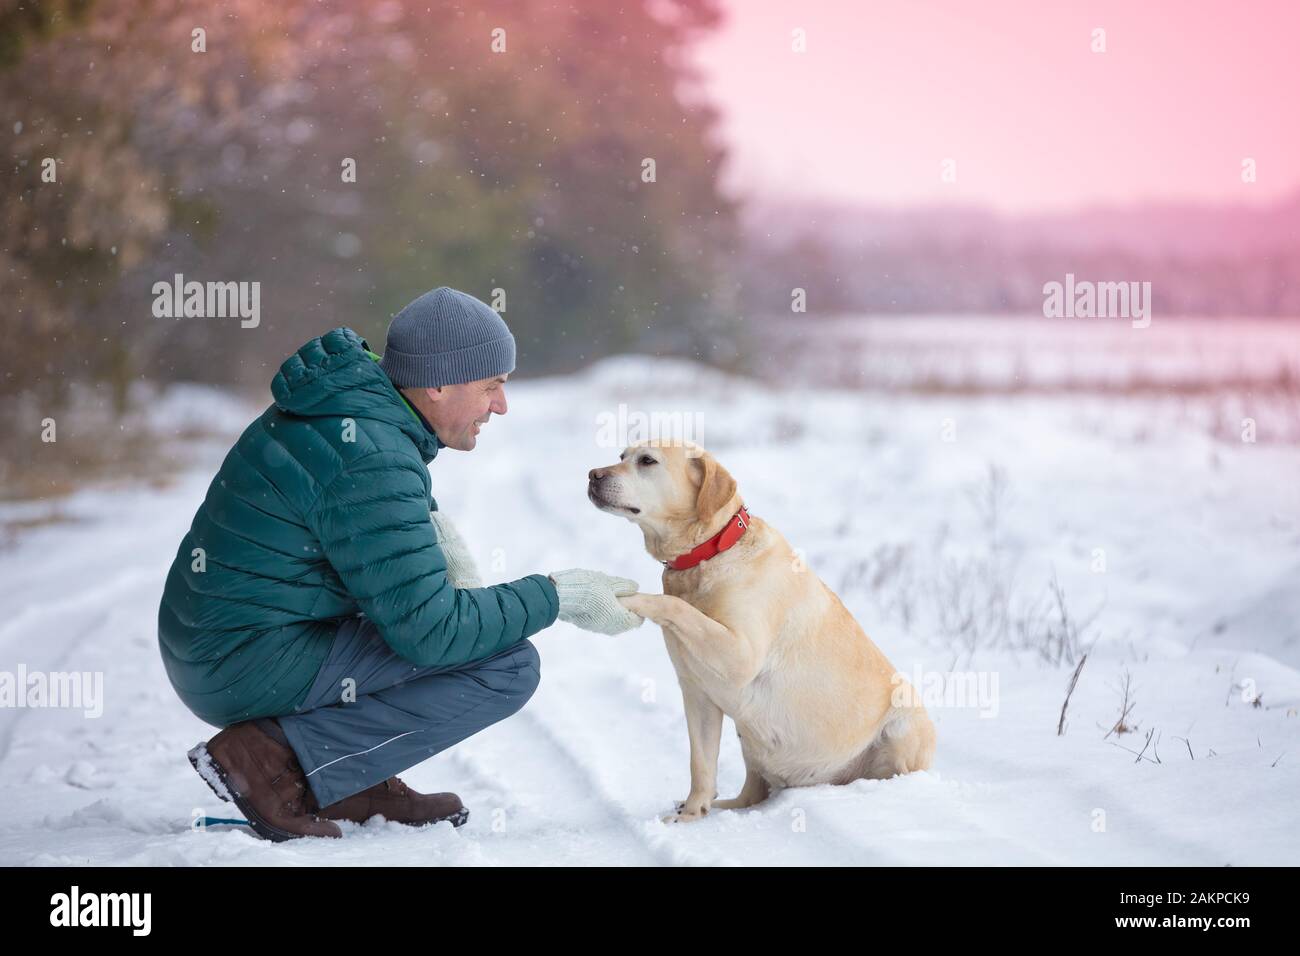 A and dog are best friends. The man with the dog sitting in a snowy field in winter. Trained Labrador retriever extends the paw to the man Stock Photo Alamy